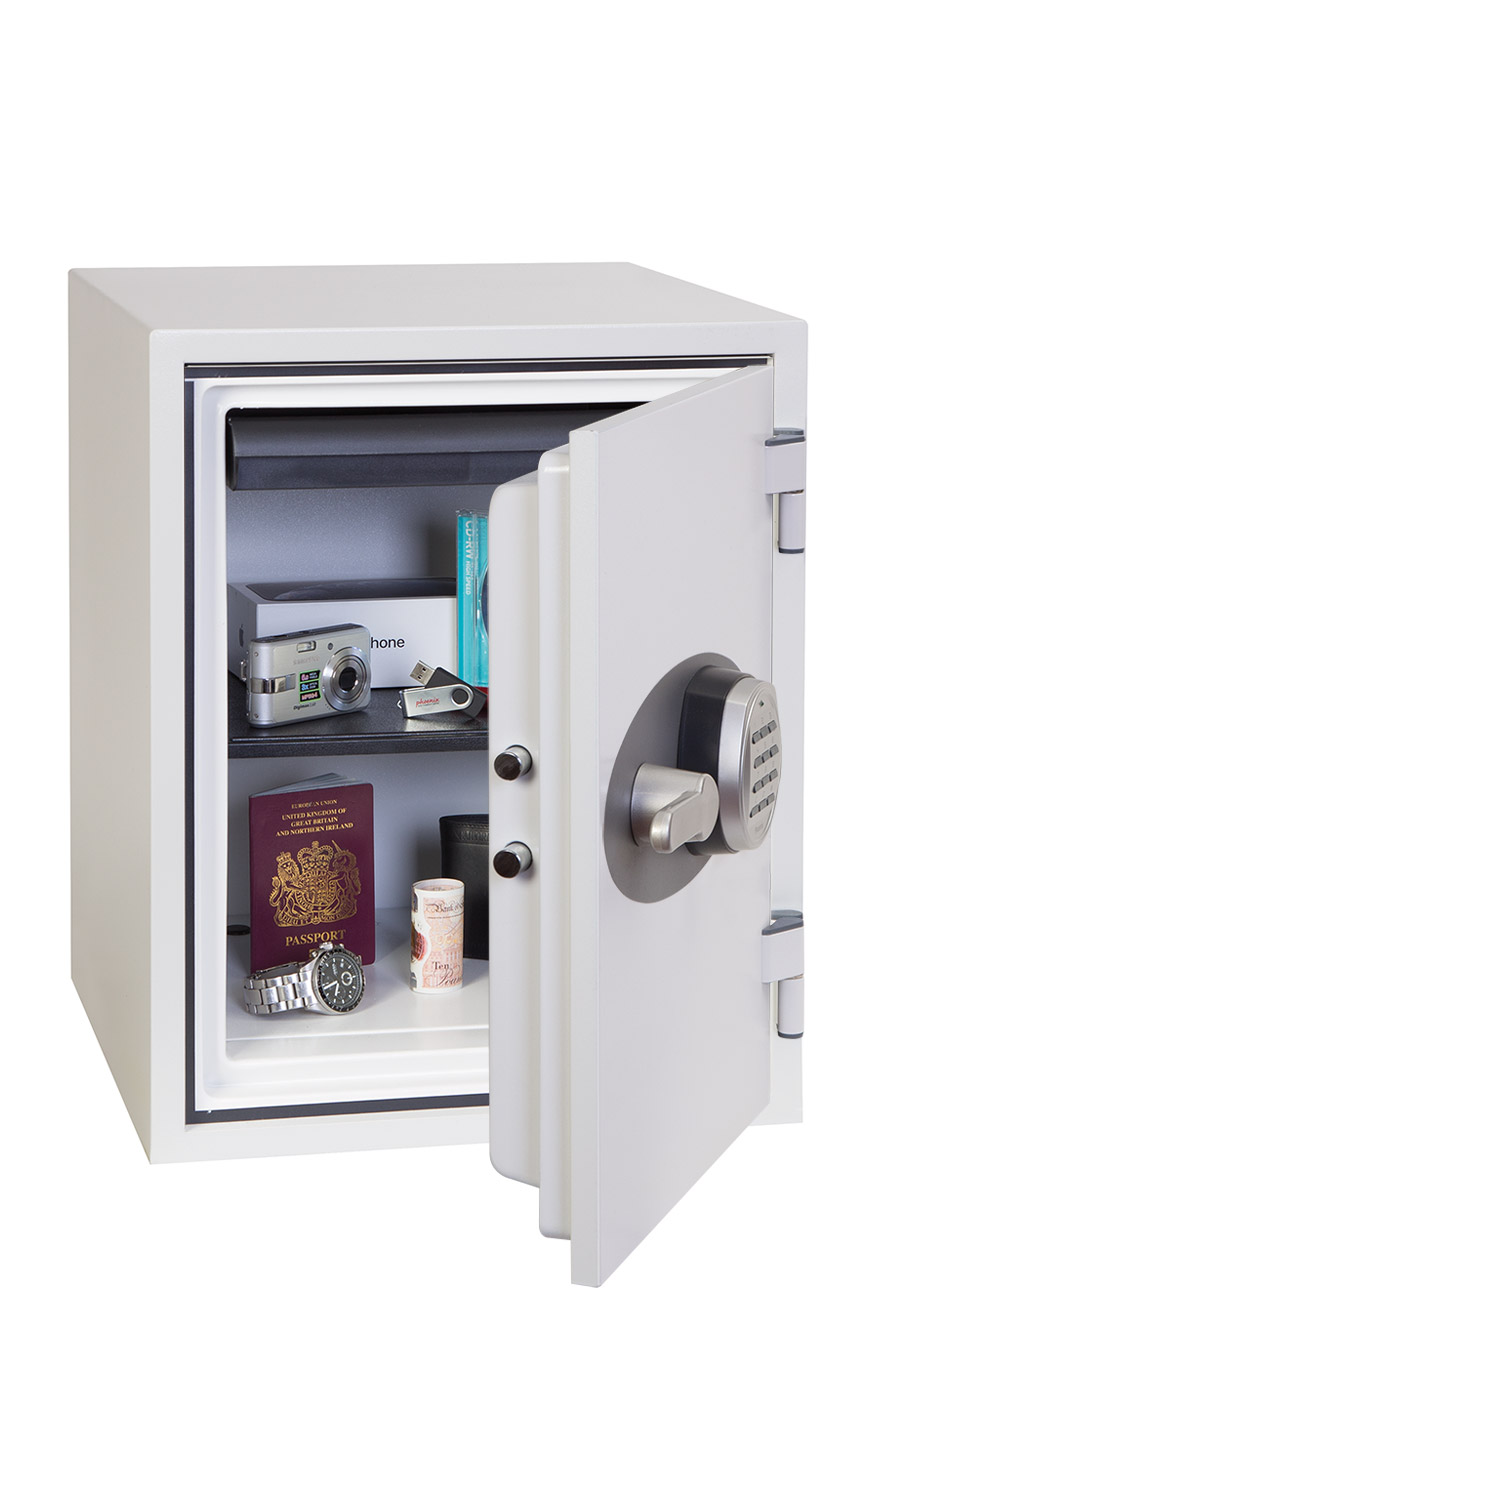 Phoenix Titan Fs1283e Size 3 Fire Security Safe With Electronic